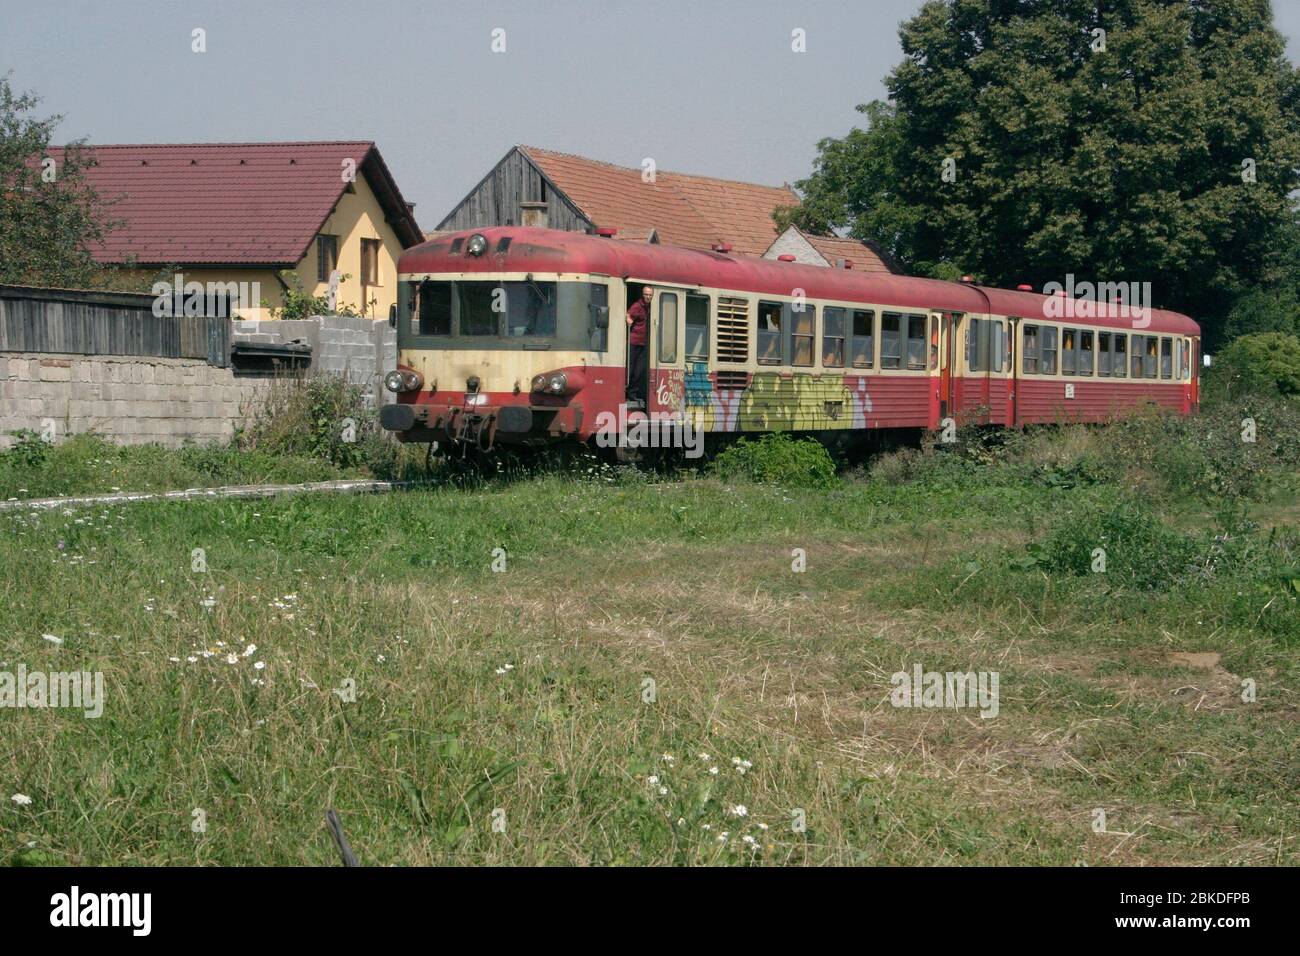 Two-car passenger train in Romania's countryside Stock Photo